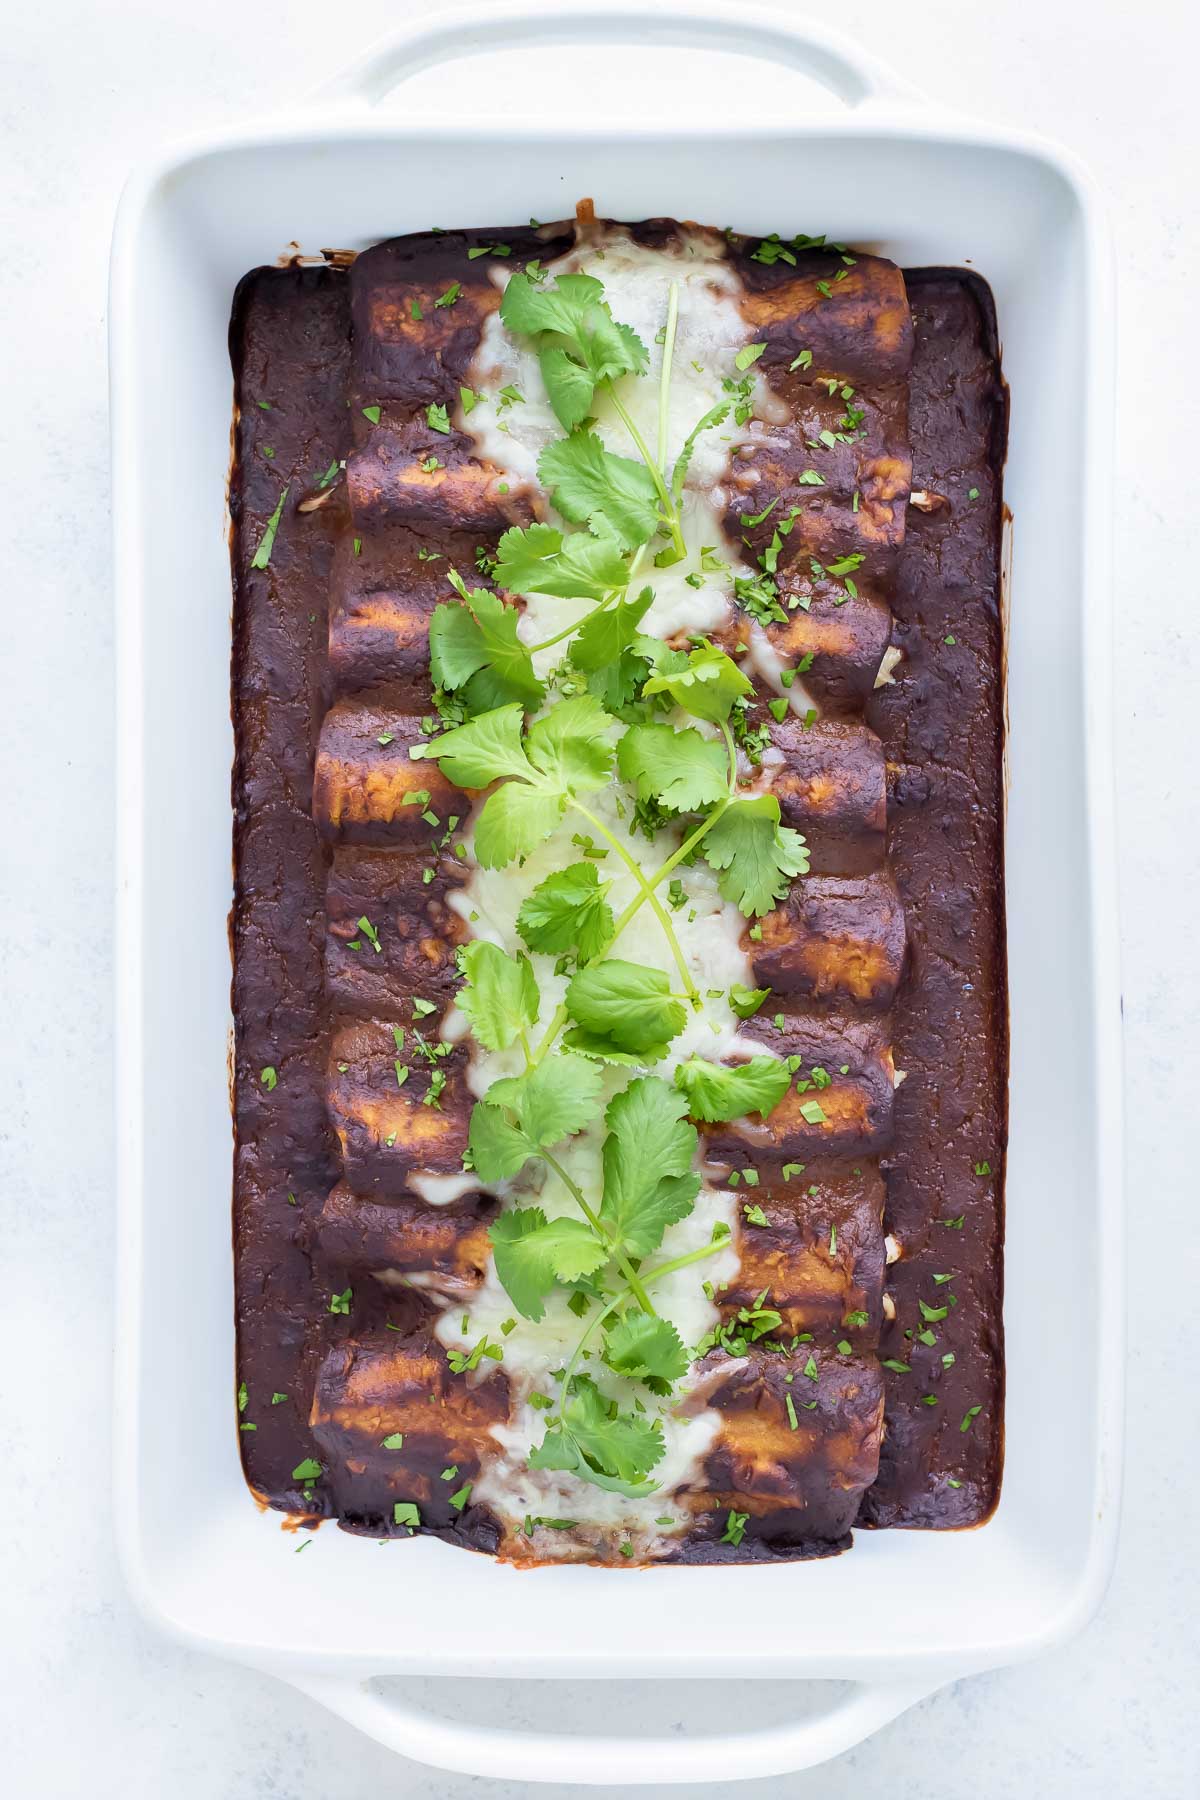 Easy Chicken Mole Enchiladas are topped with fresh cilantro for dinner.